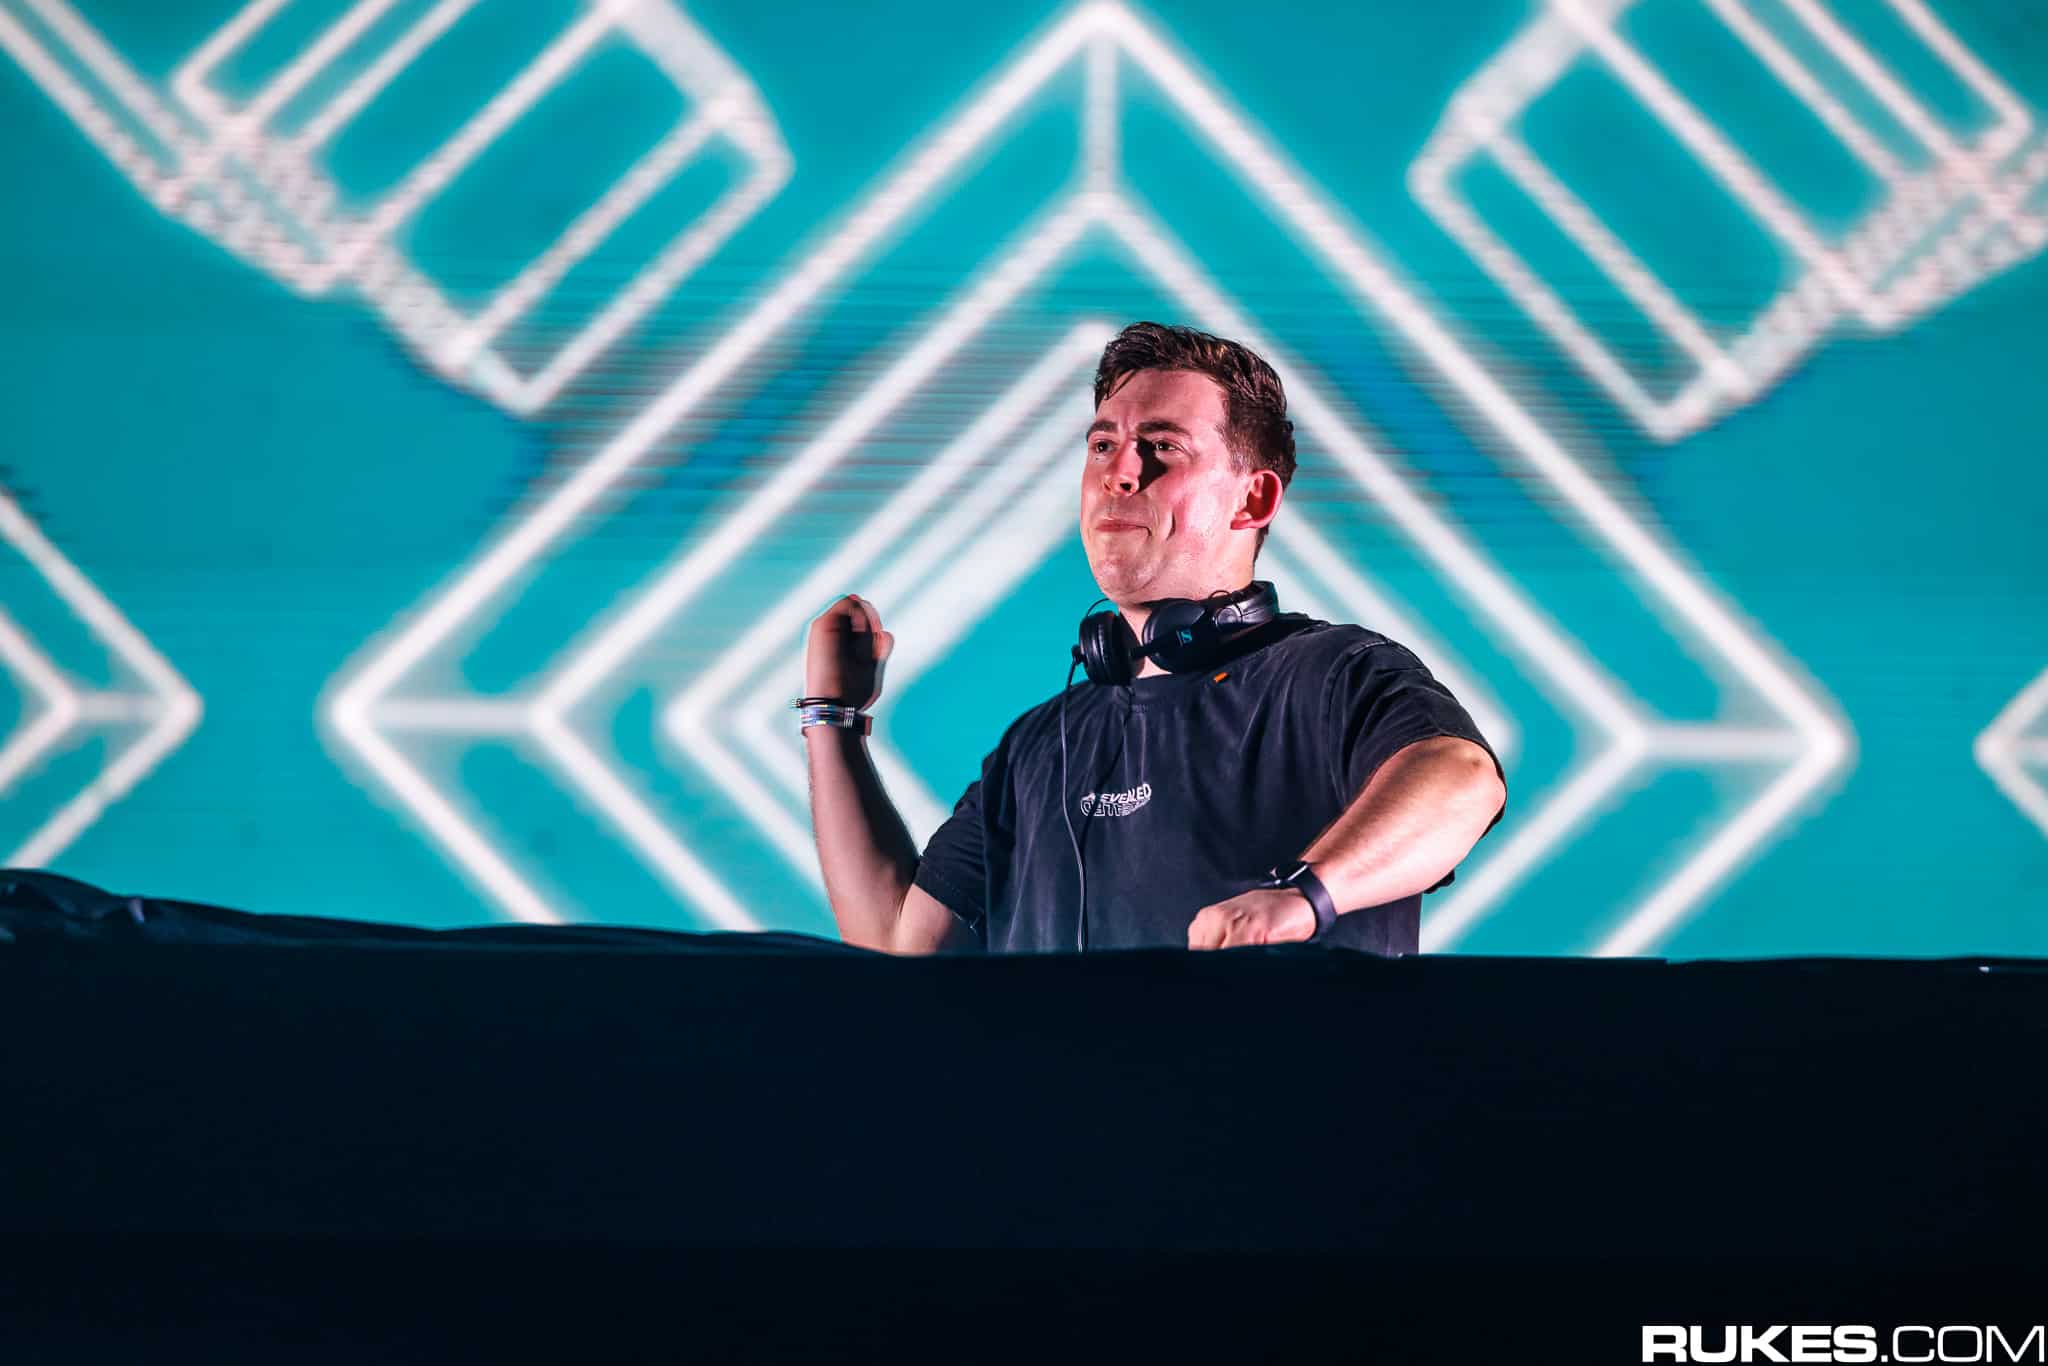 Hardwell remix of Calvin Harris & Ellie Goulding hit ‘Miracle’ gets official release: Listen